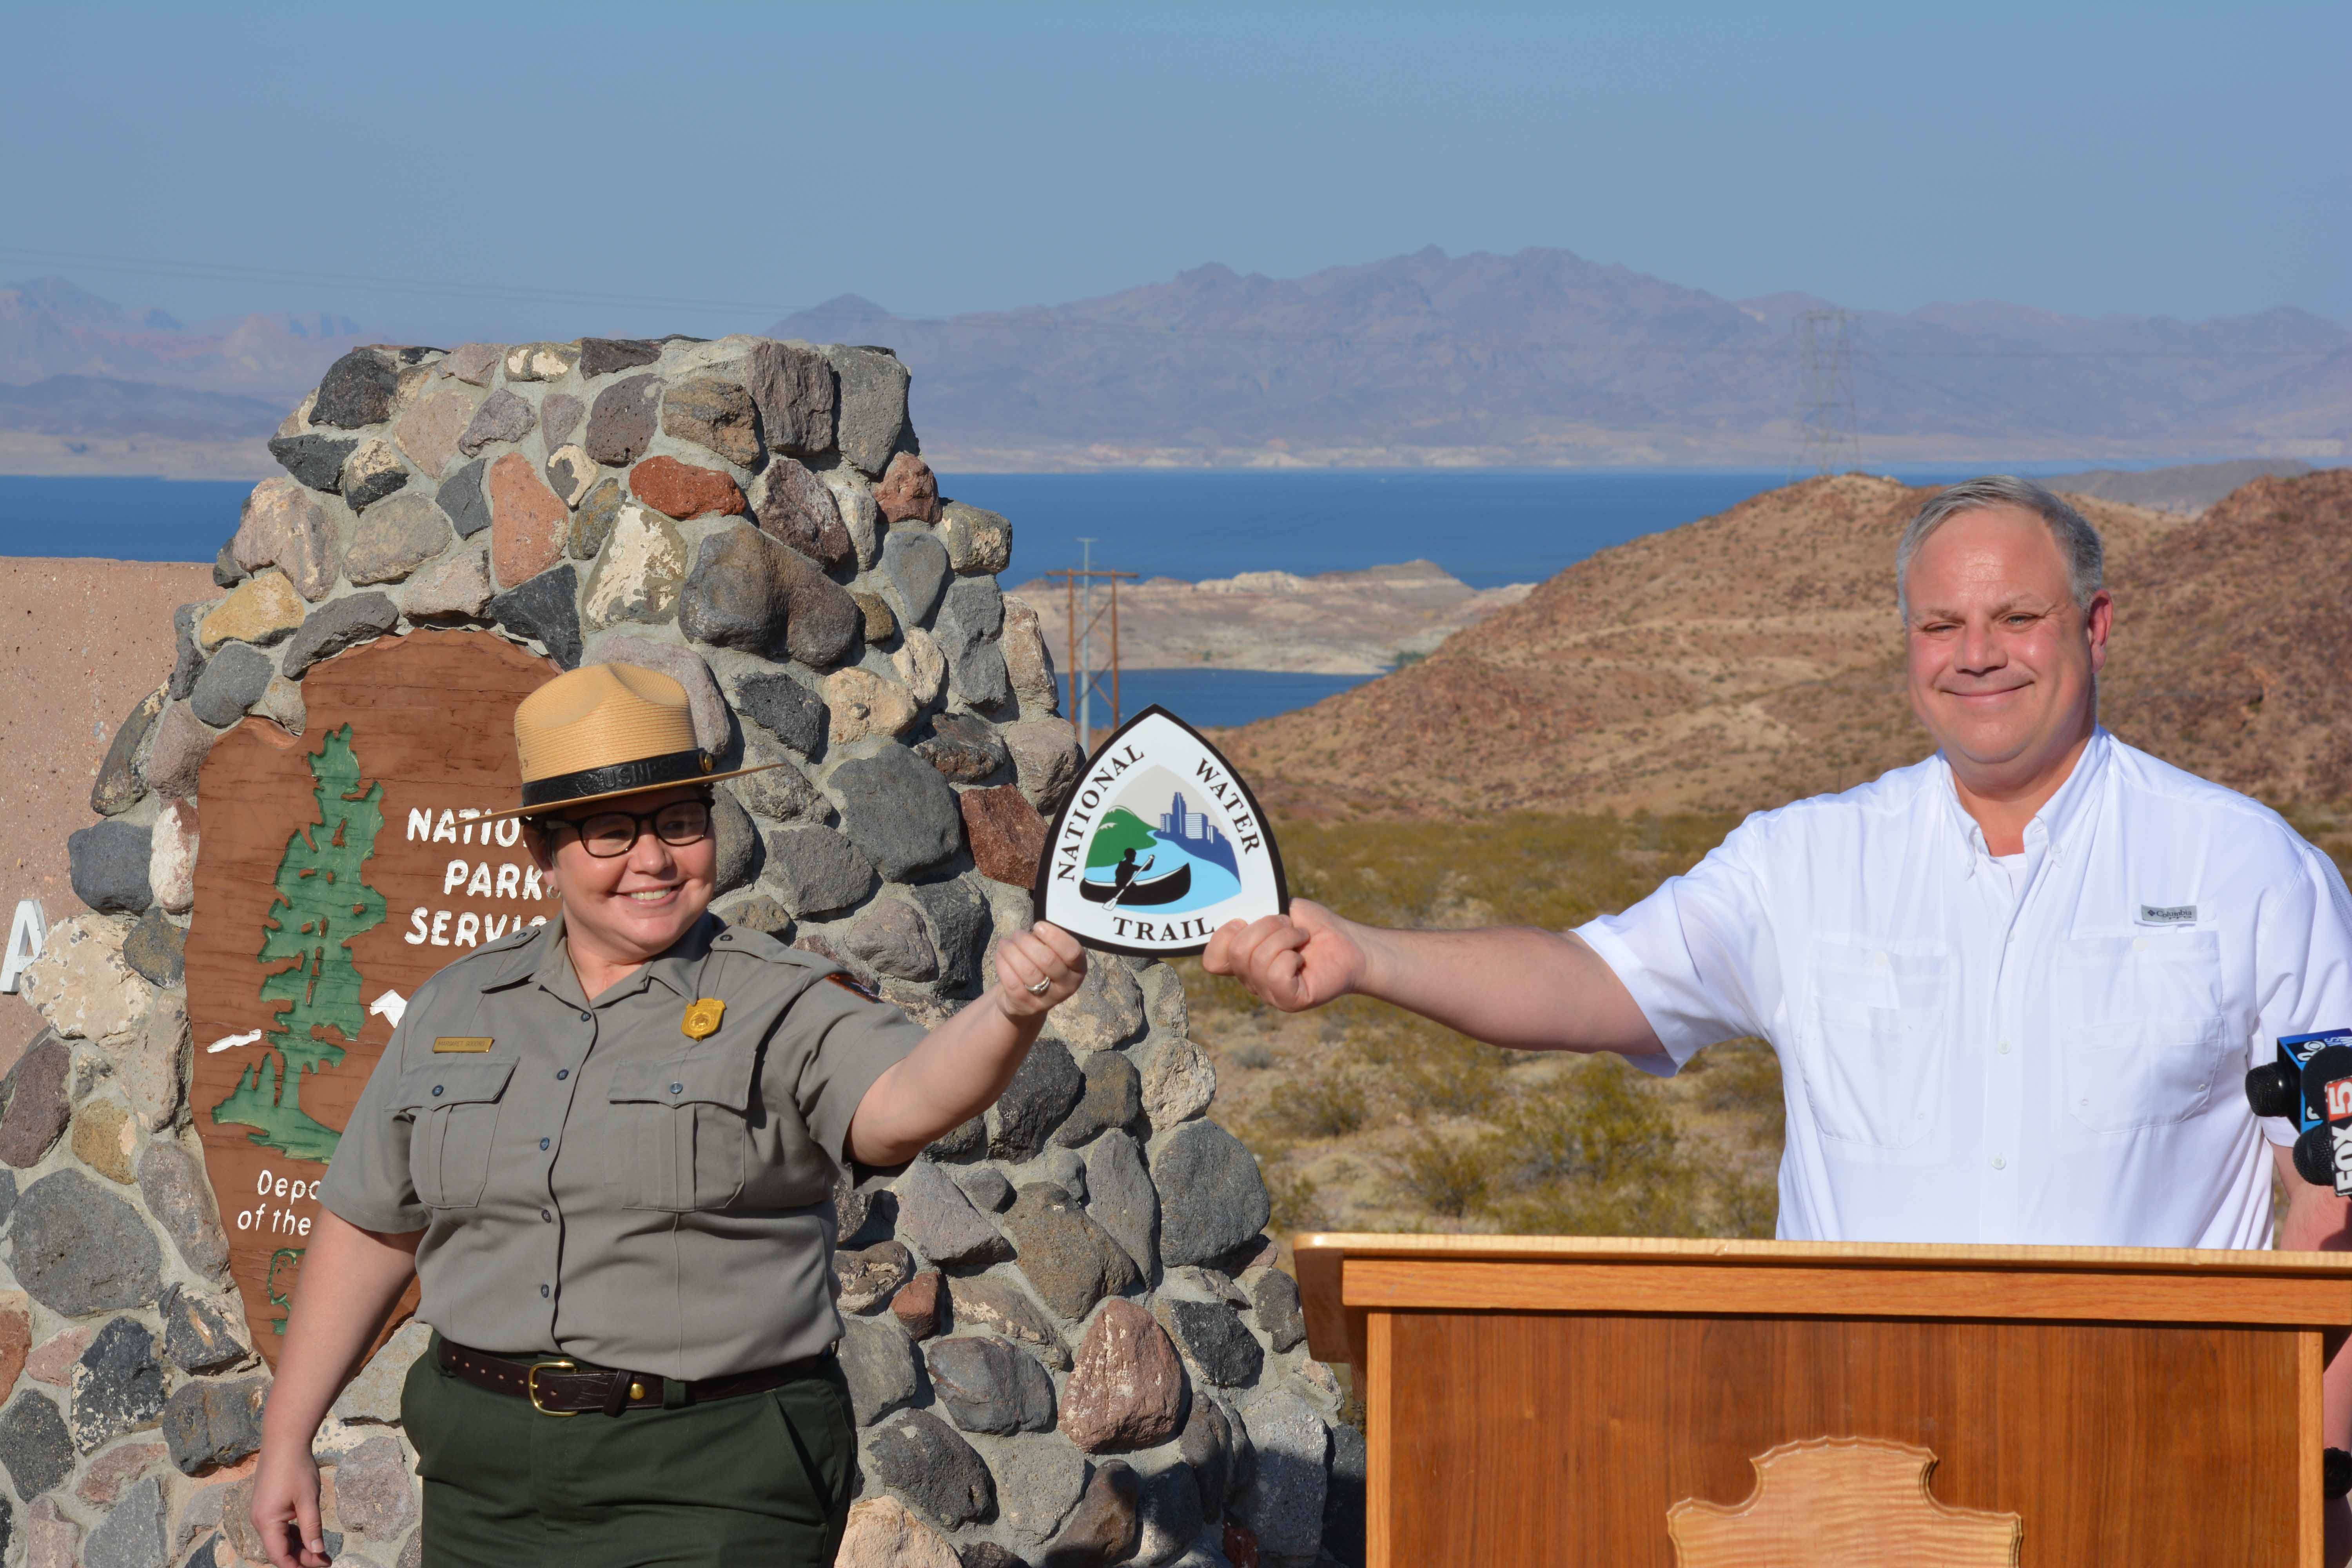 A man and park ranger holding up a sign in front of a Lake Mead Monument.